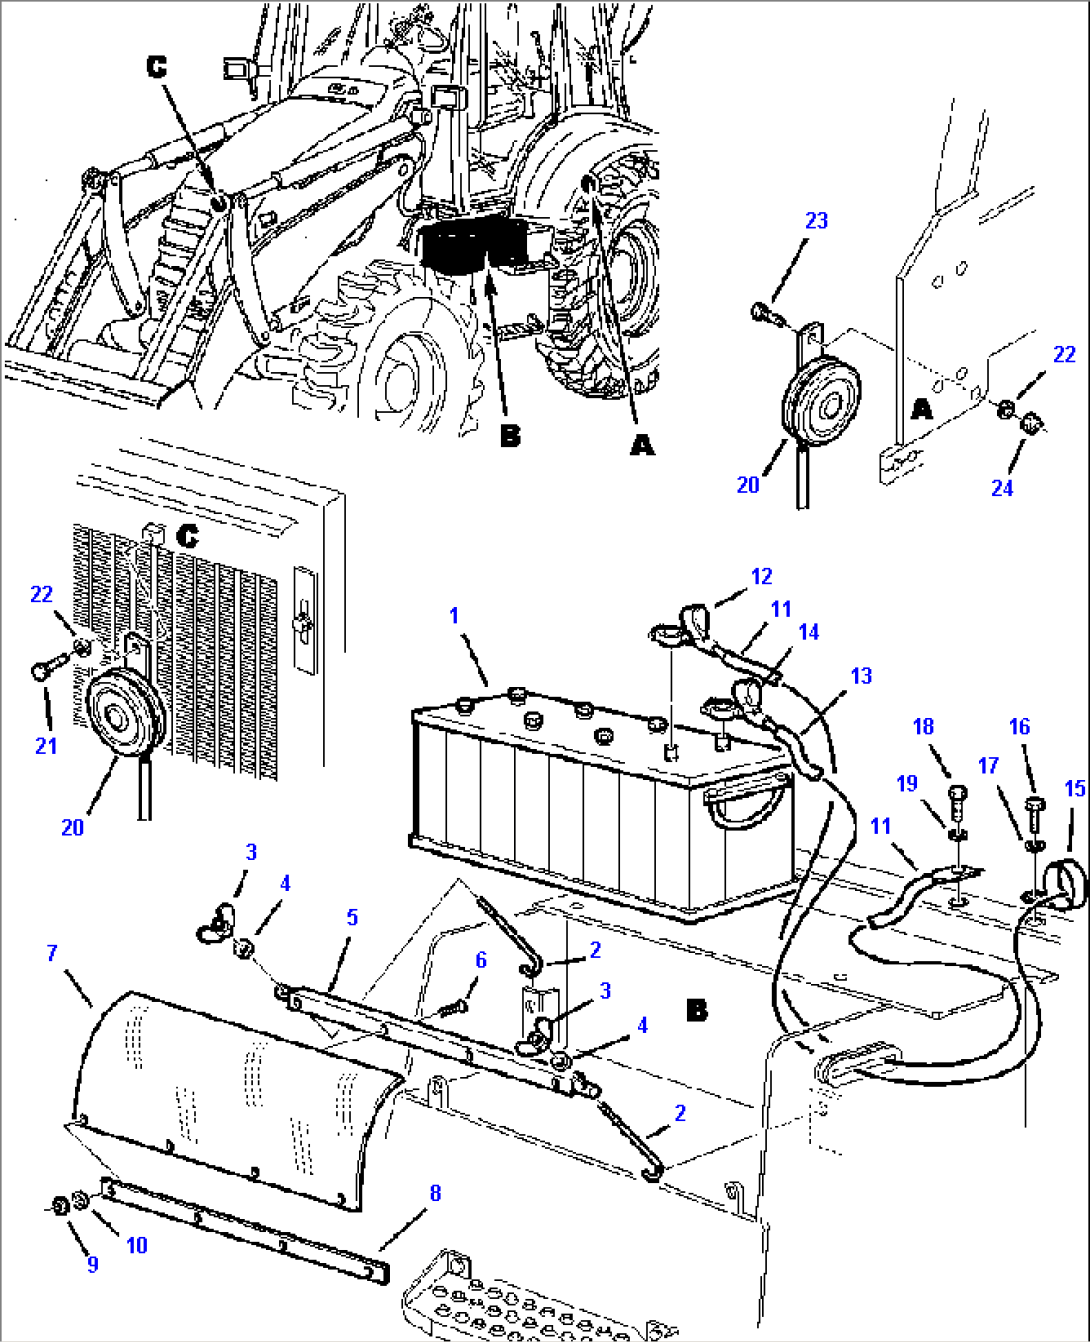 FIG. E1501-01A5 ELECTRICAL SYSTEM - BATTERY AND HORNS